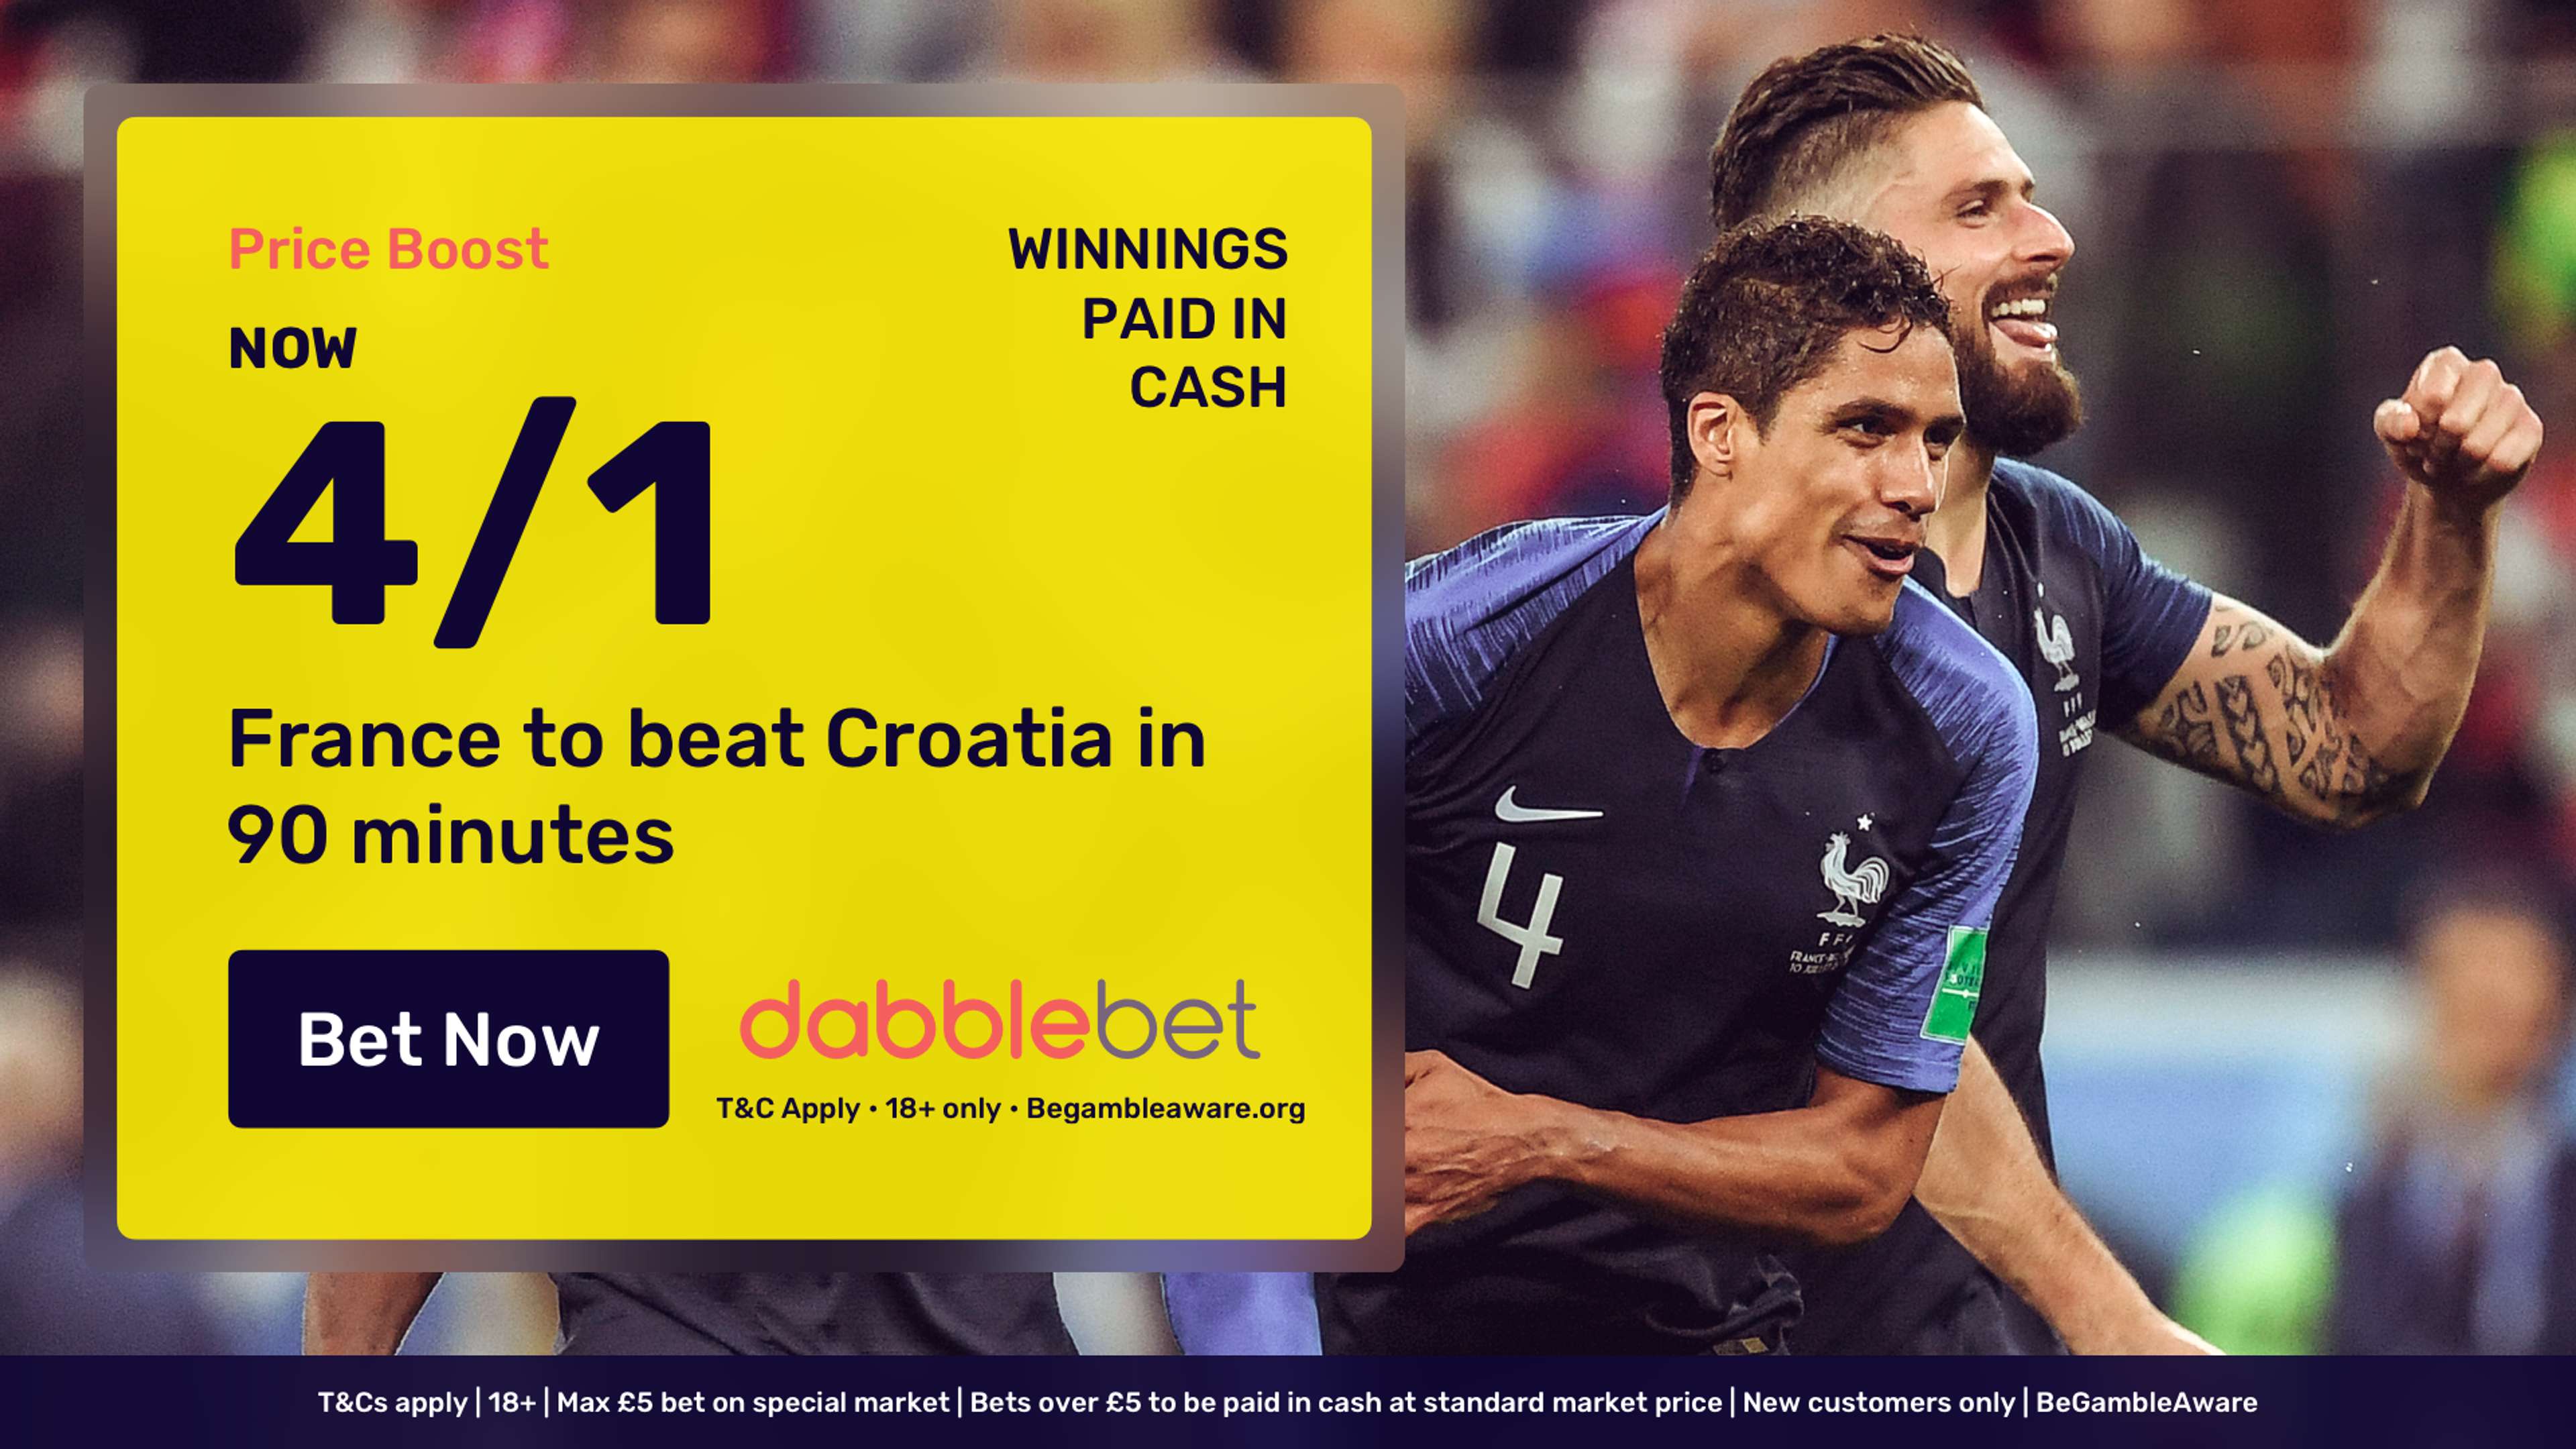 World Cup final price boost dabblebet in article